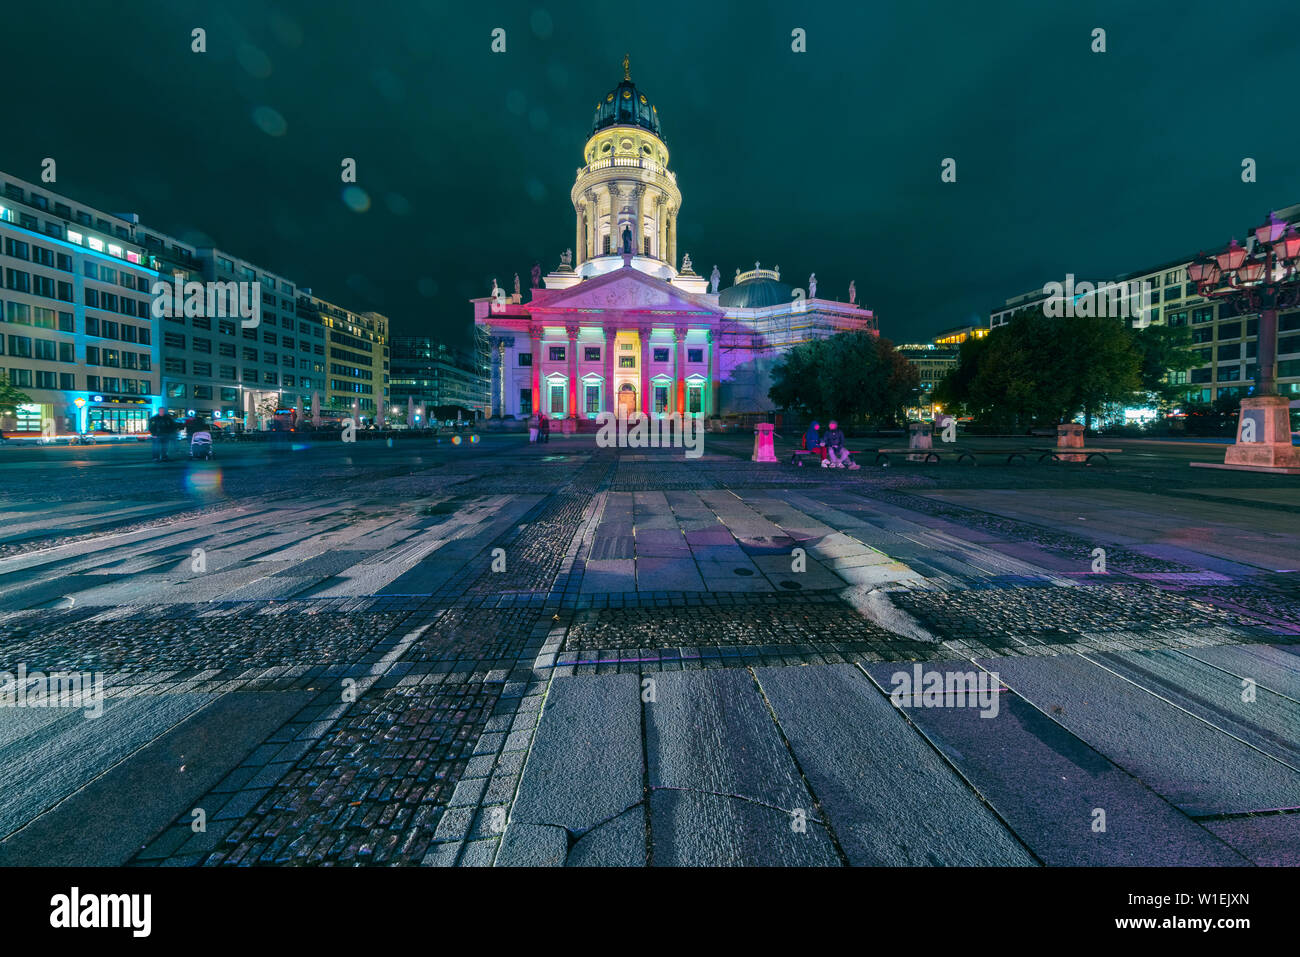 The French Dom (Cathedral) at Gendarmenmarkt at night, Berlin, Germany, Europe Stock Photo